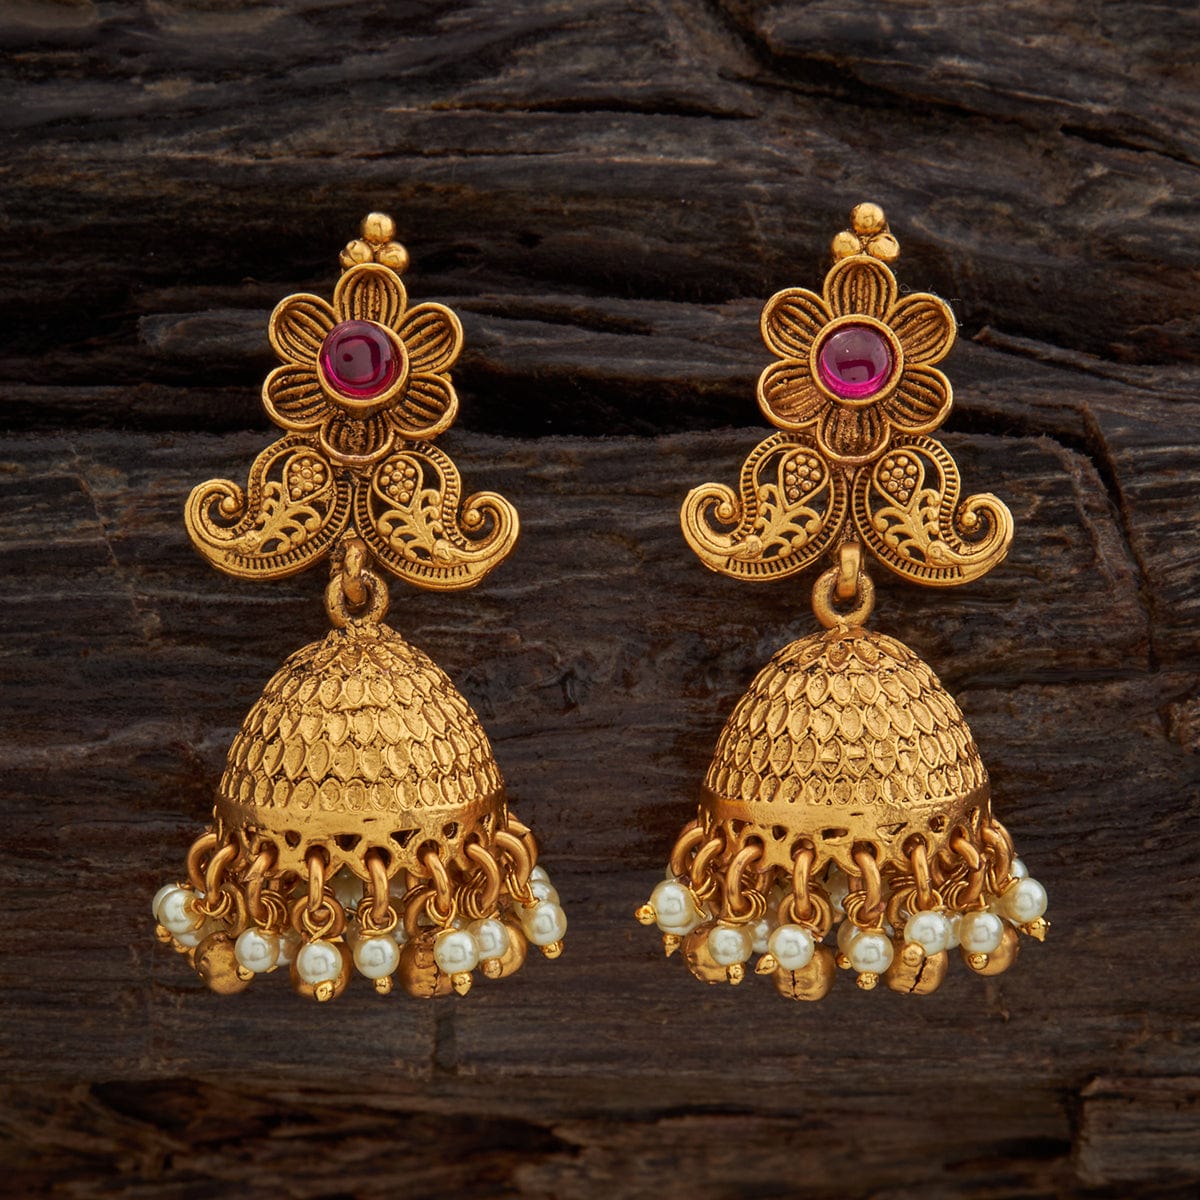 Shop Antique Earrings Online For Women-Kushal's Fashion Jewellery – Page 2  | Gold earrings models, Gold earrings designs, Gold jhumka earrings